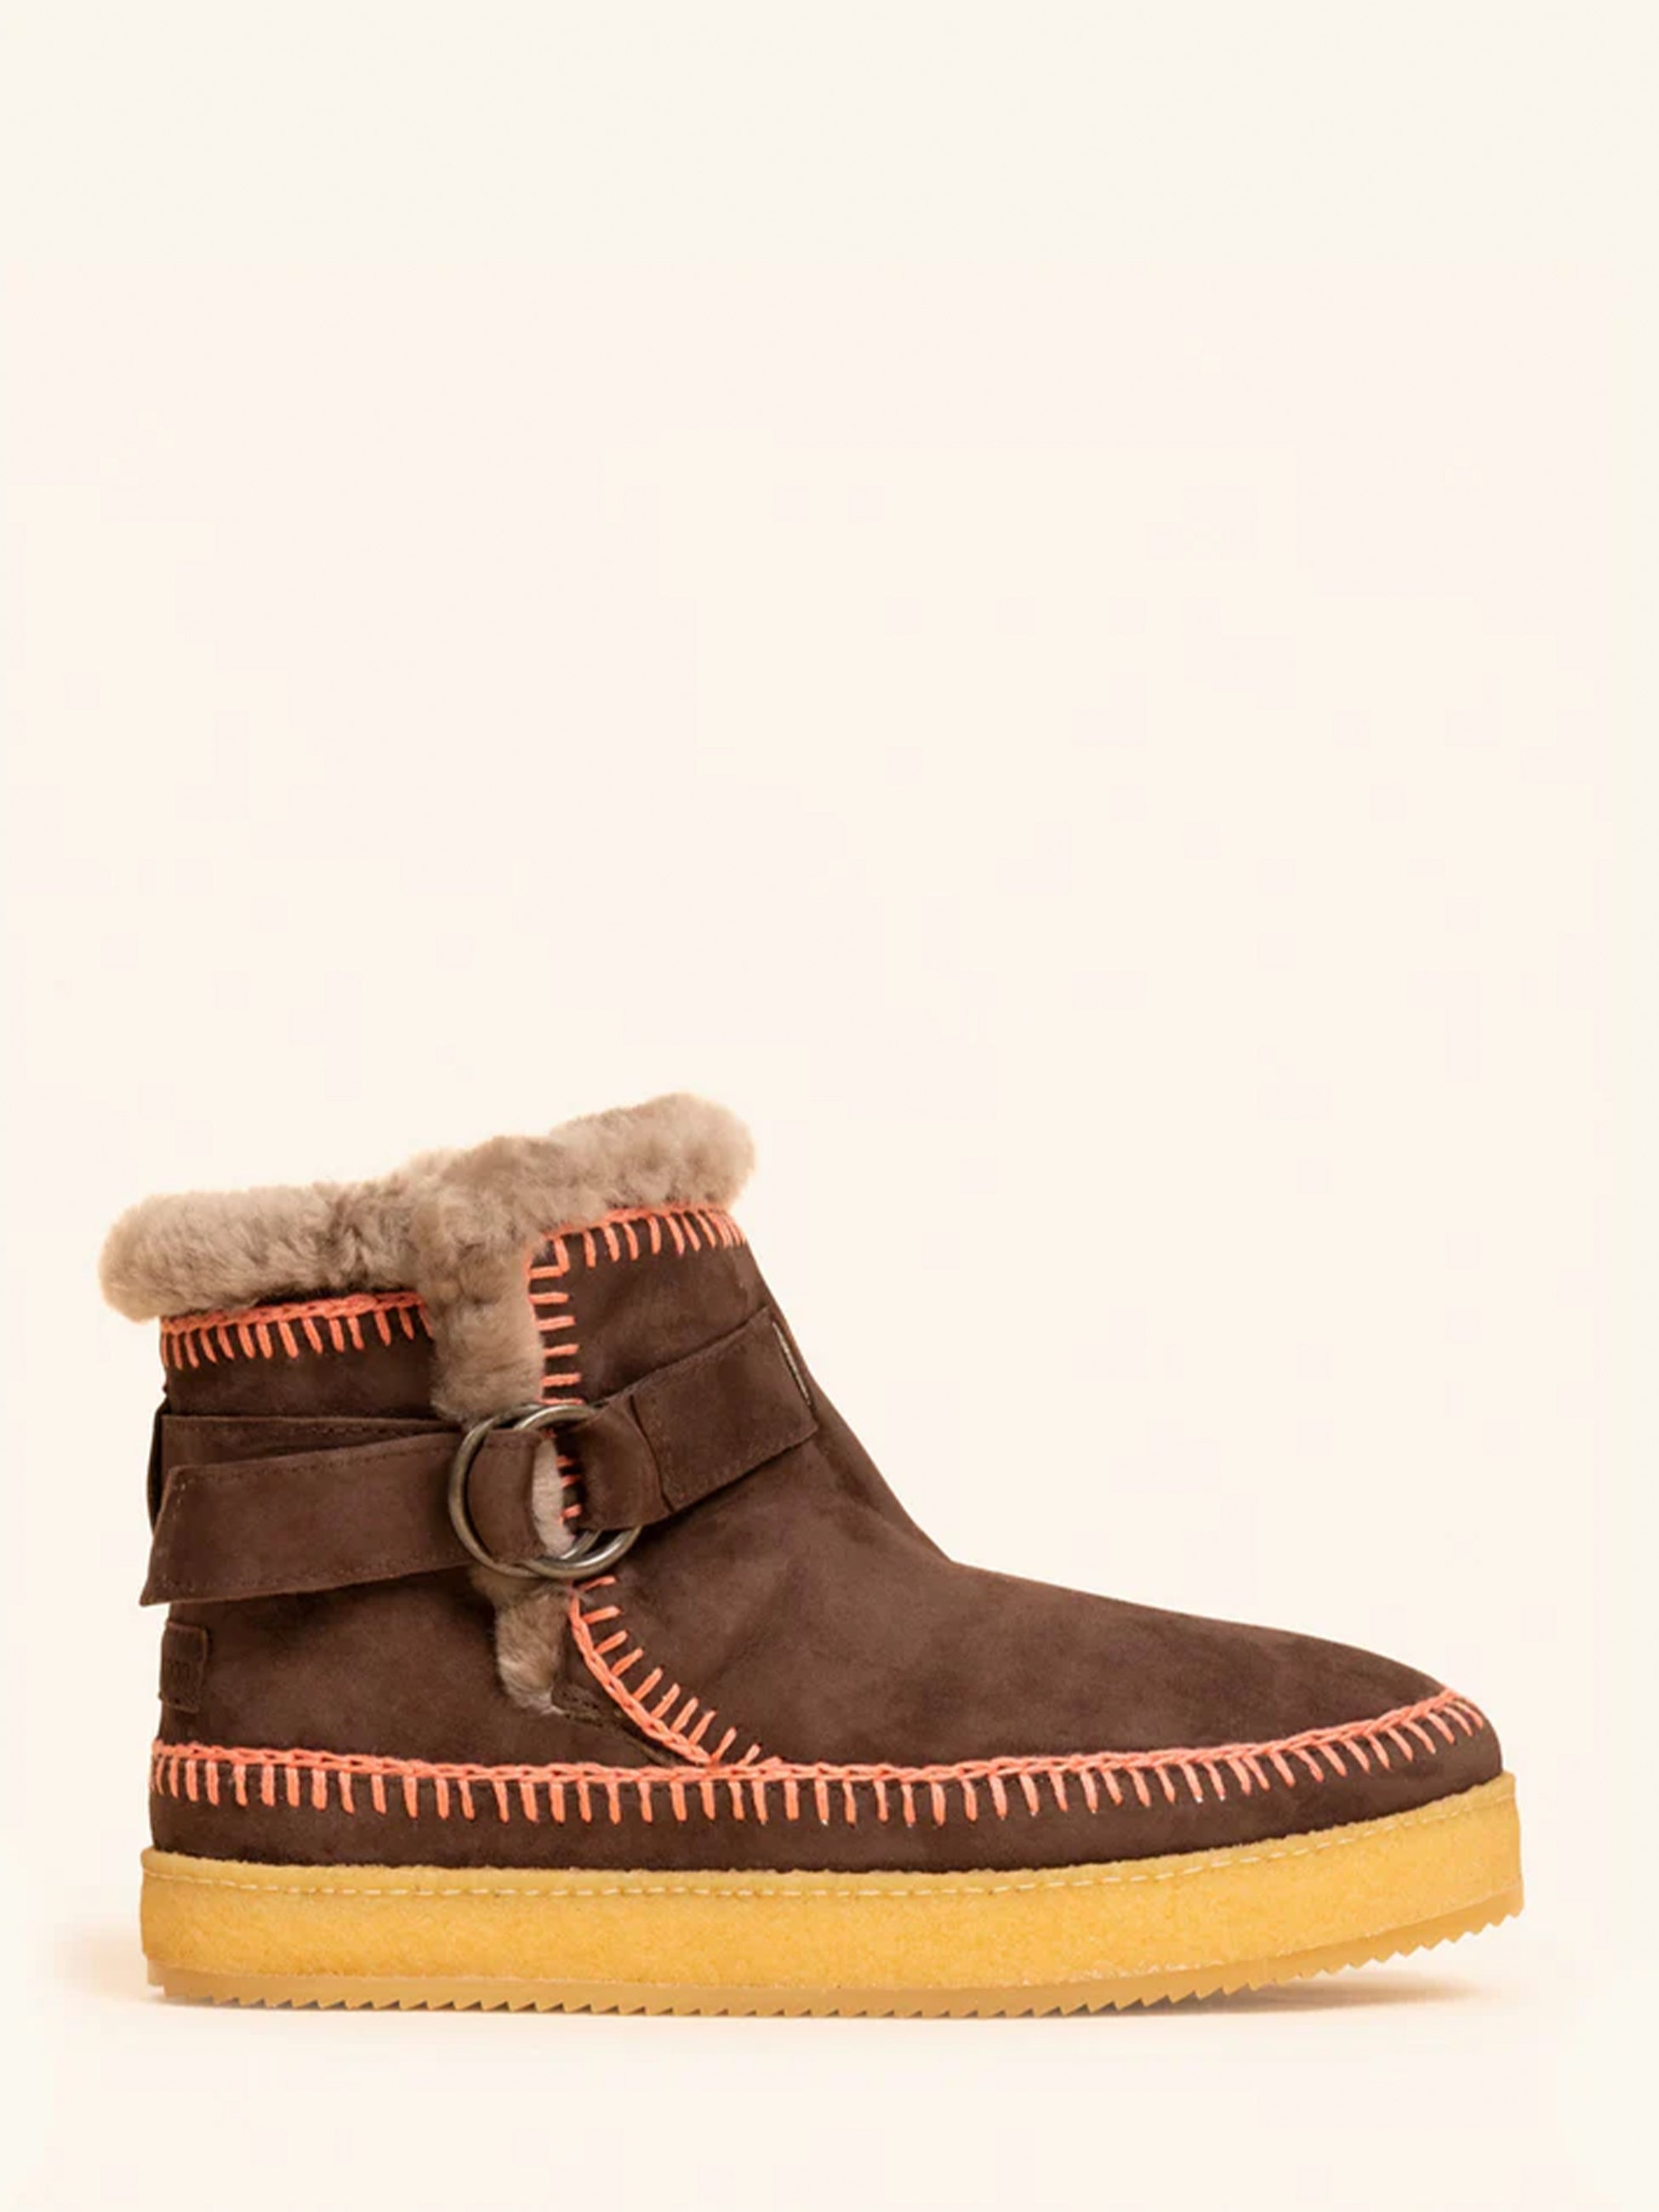 Sion Crochet Crepe Boot - Choc Suede